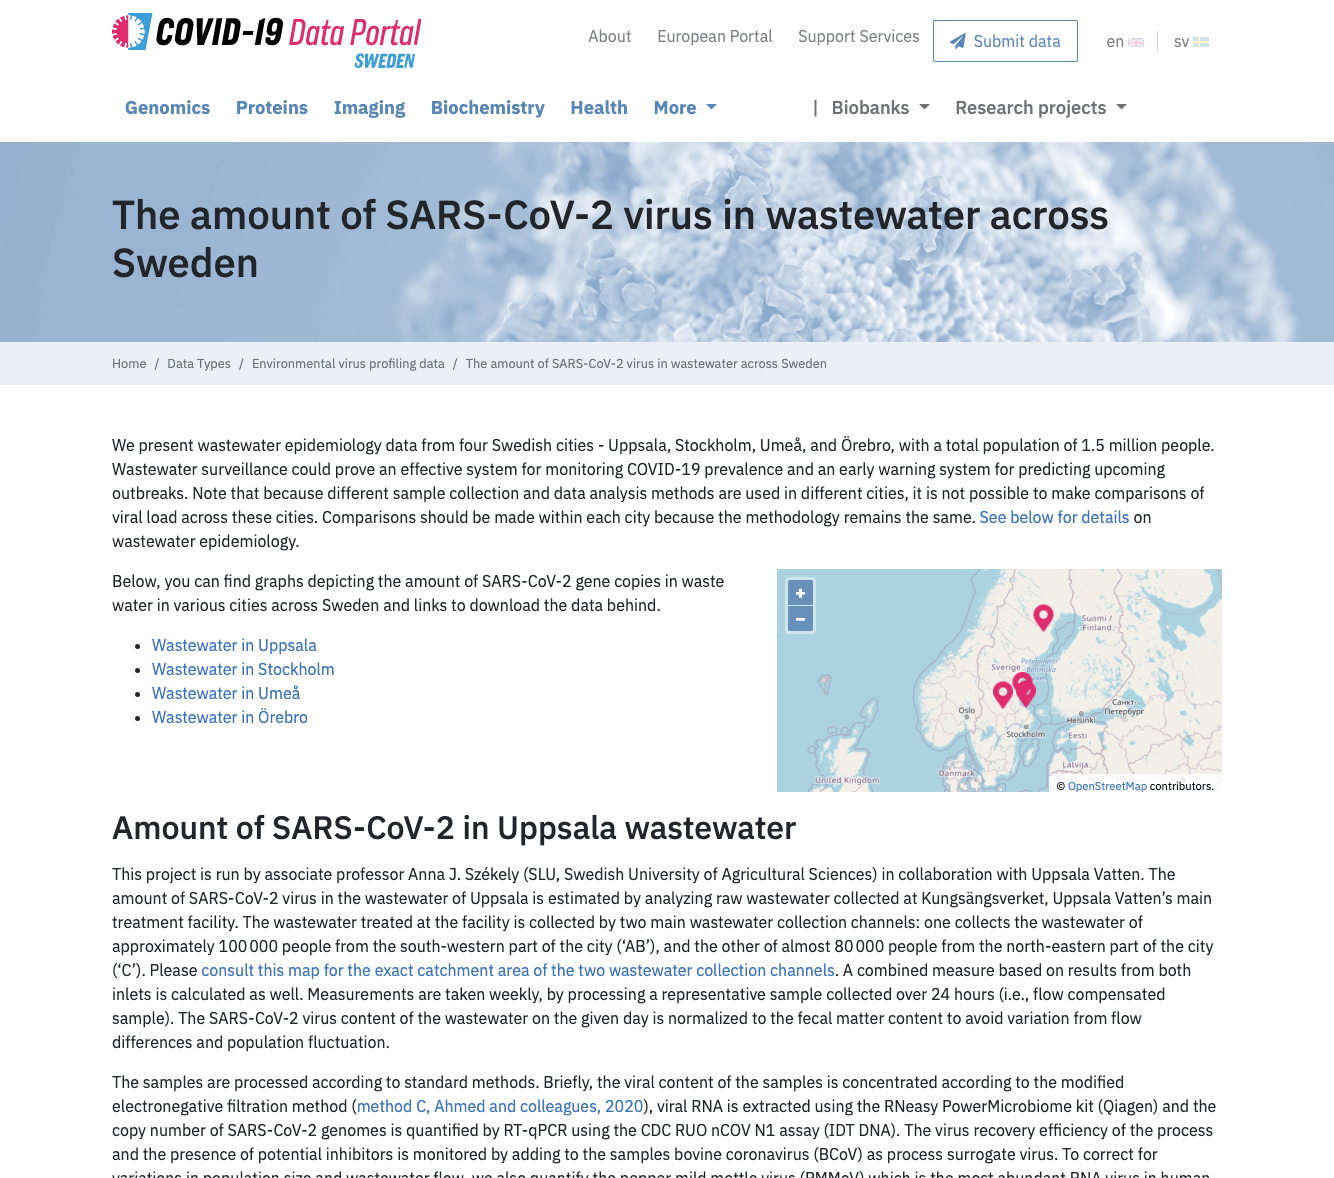 SARS-CoV-2 wastewater data from cities across Sweden now available